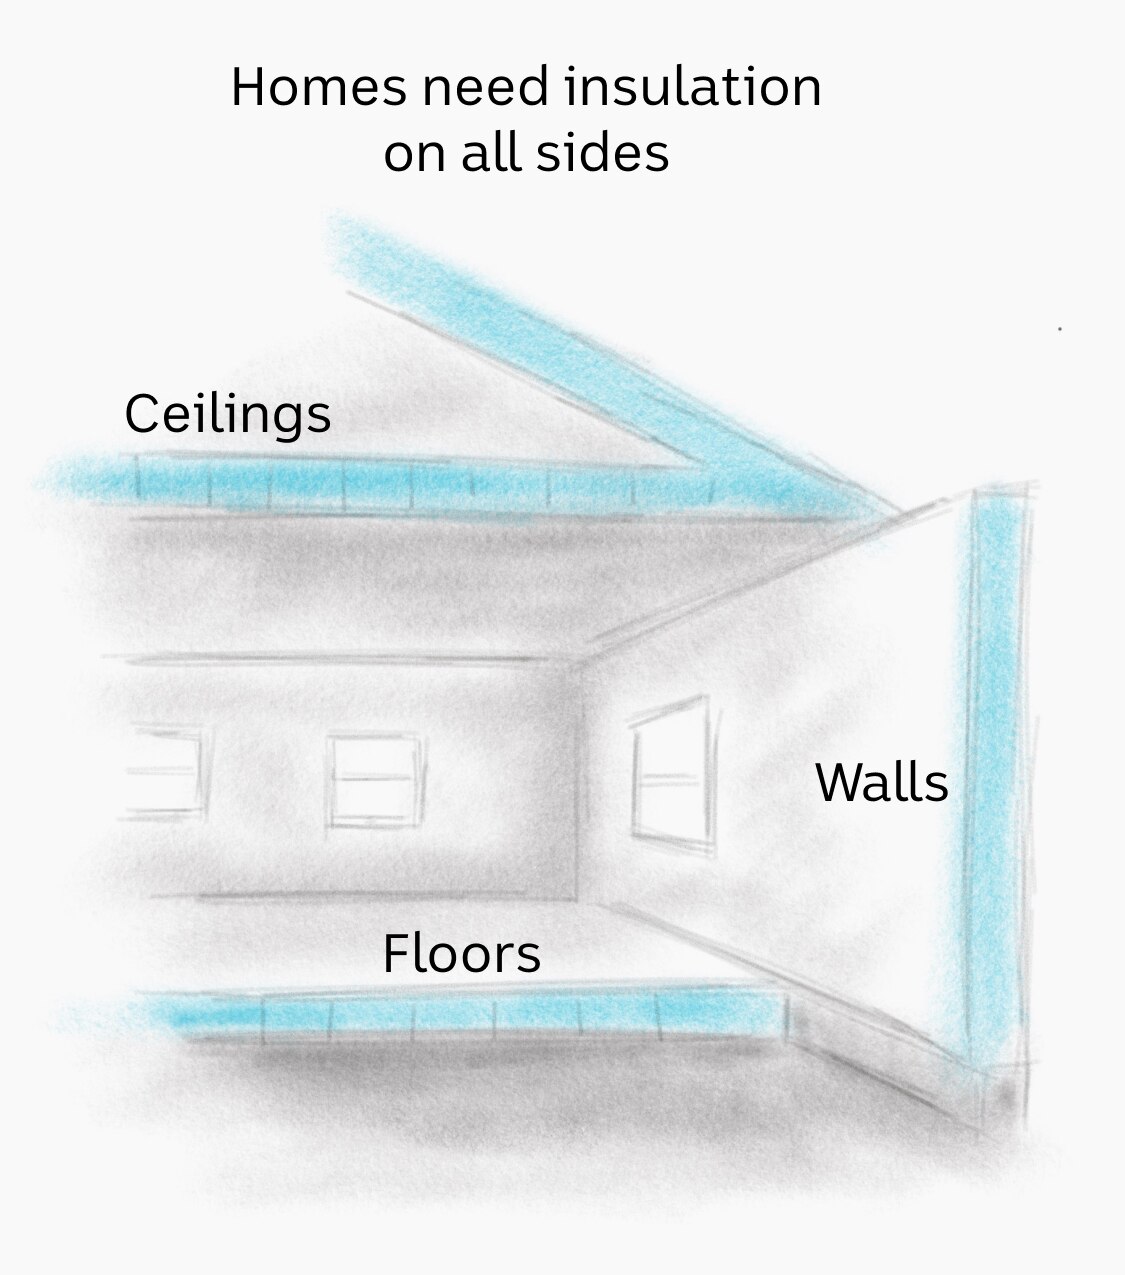 An illustration shows the corner of a house with highlighting in roof, walls and floor. They are labelled 